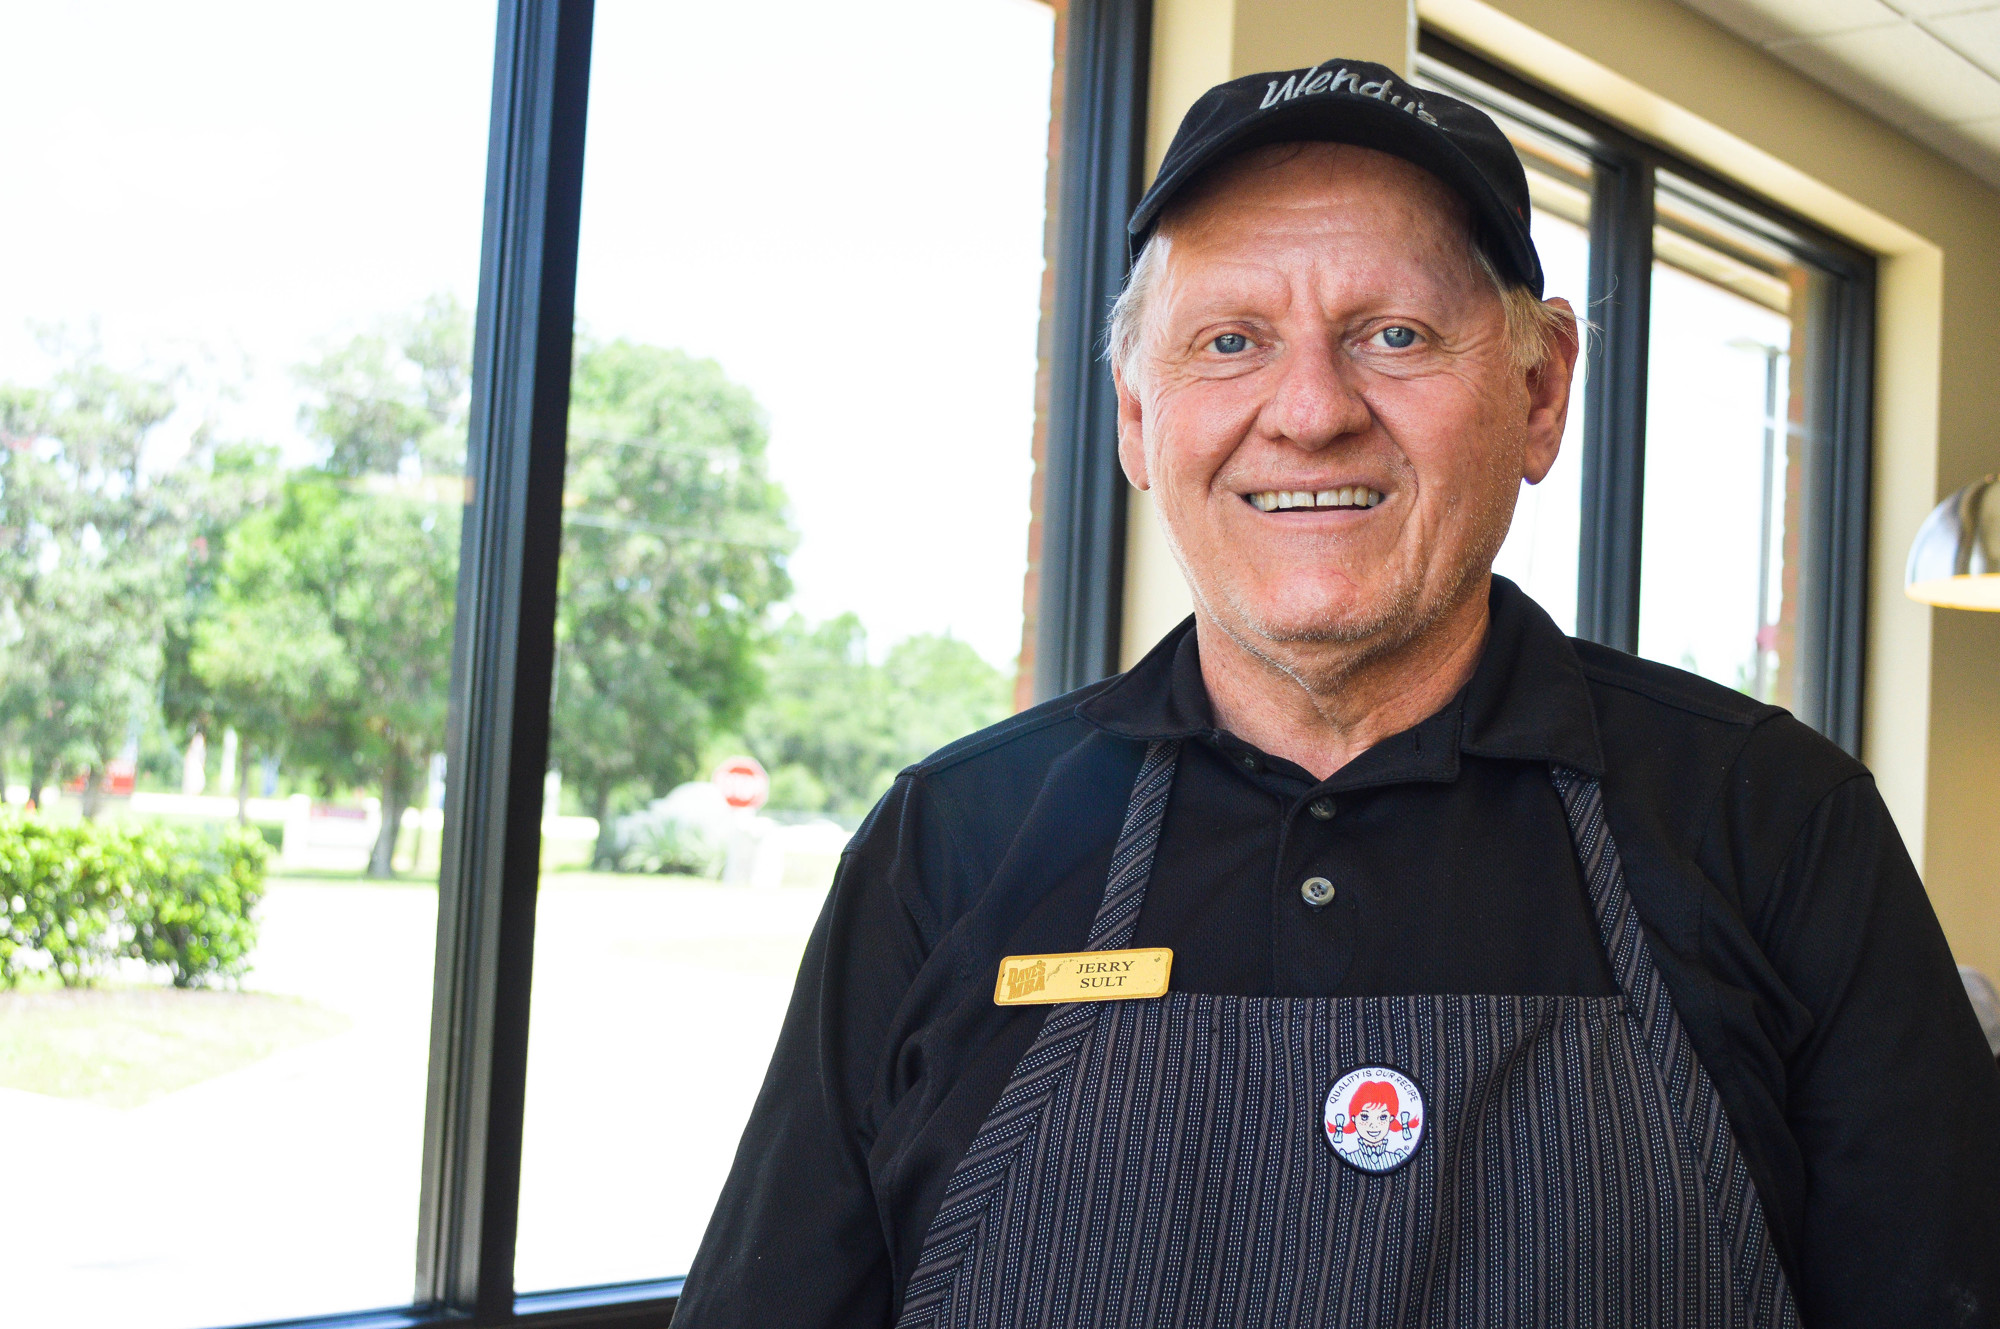 Jerry Sult, 64, works at Wendy's on State Road 100. Photo by Paige Wilson